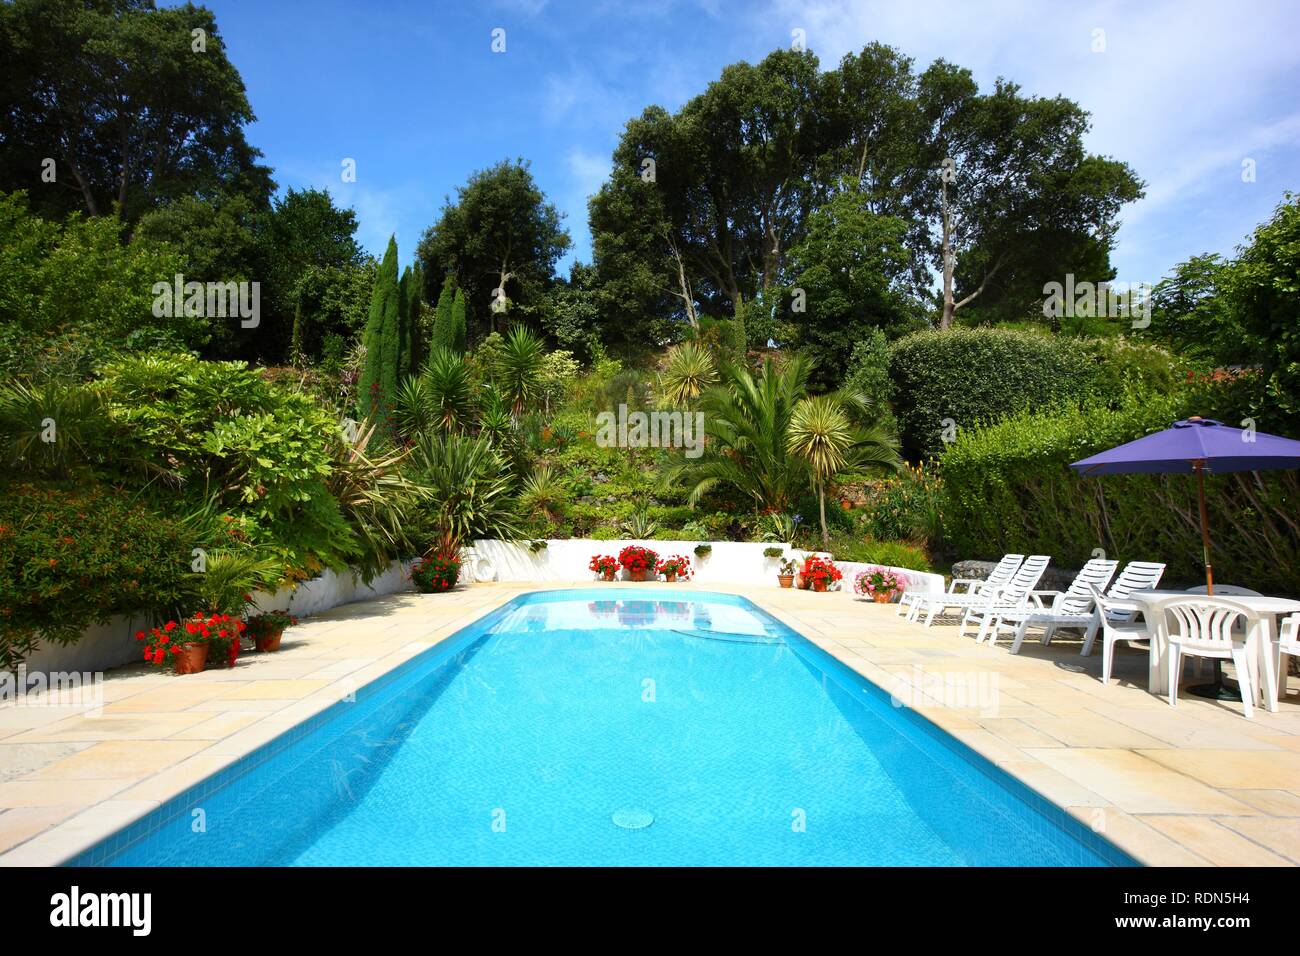 Swimming Pool Holiday Cottages Mille Fleurs Garden Garden